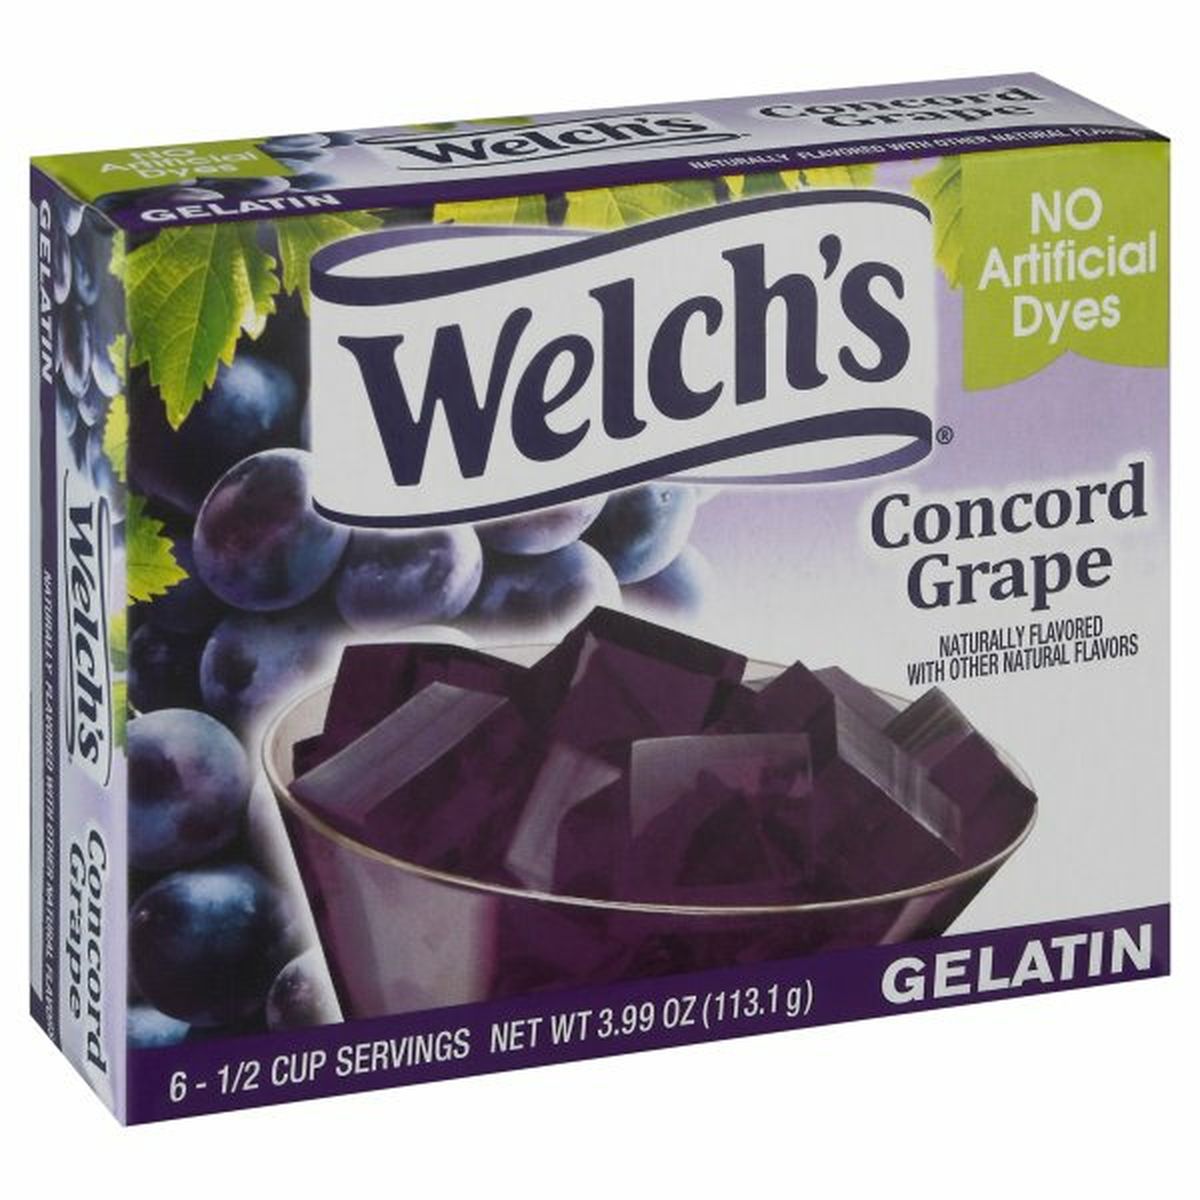 Calories in Welch's Gelatin, Concord Grape